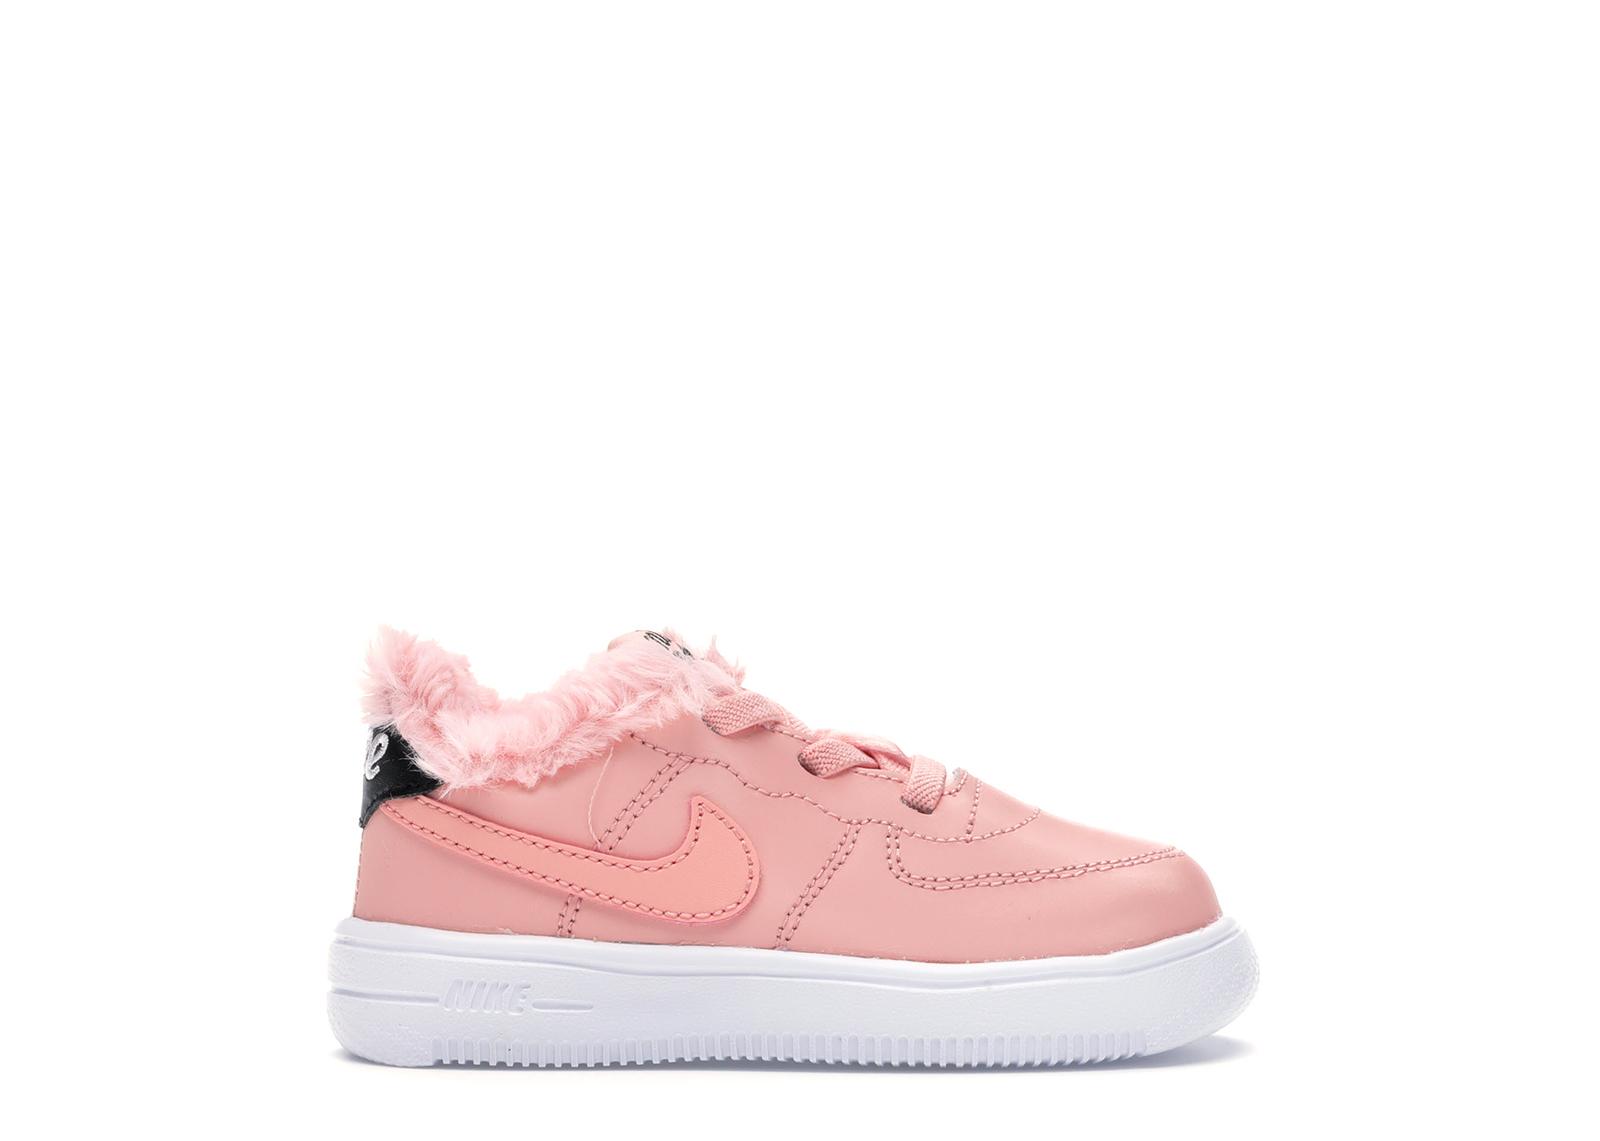 nike valentines day shoes 2019